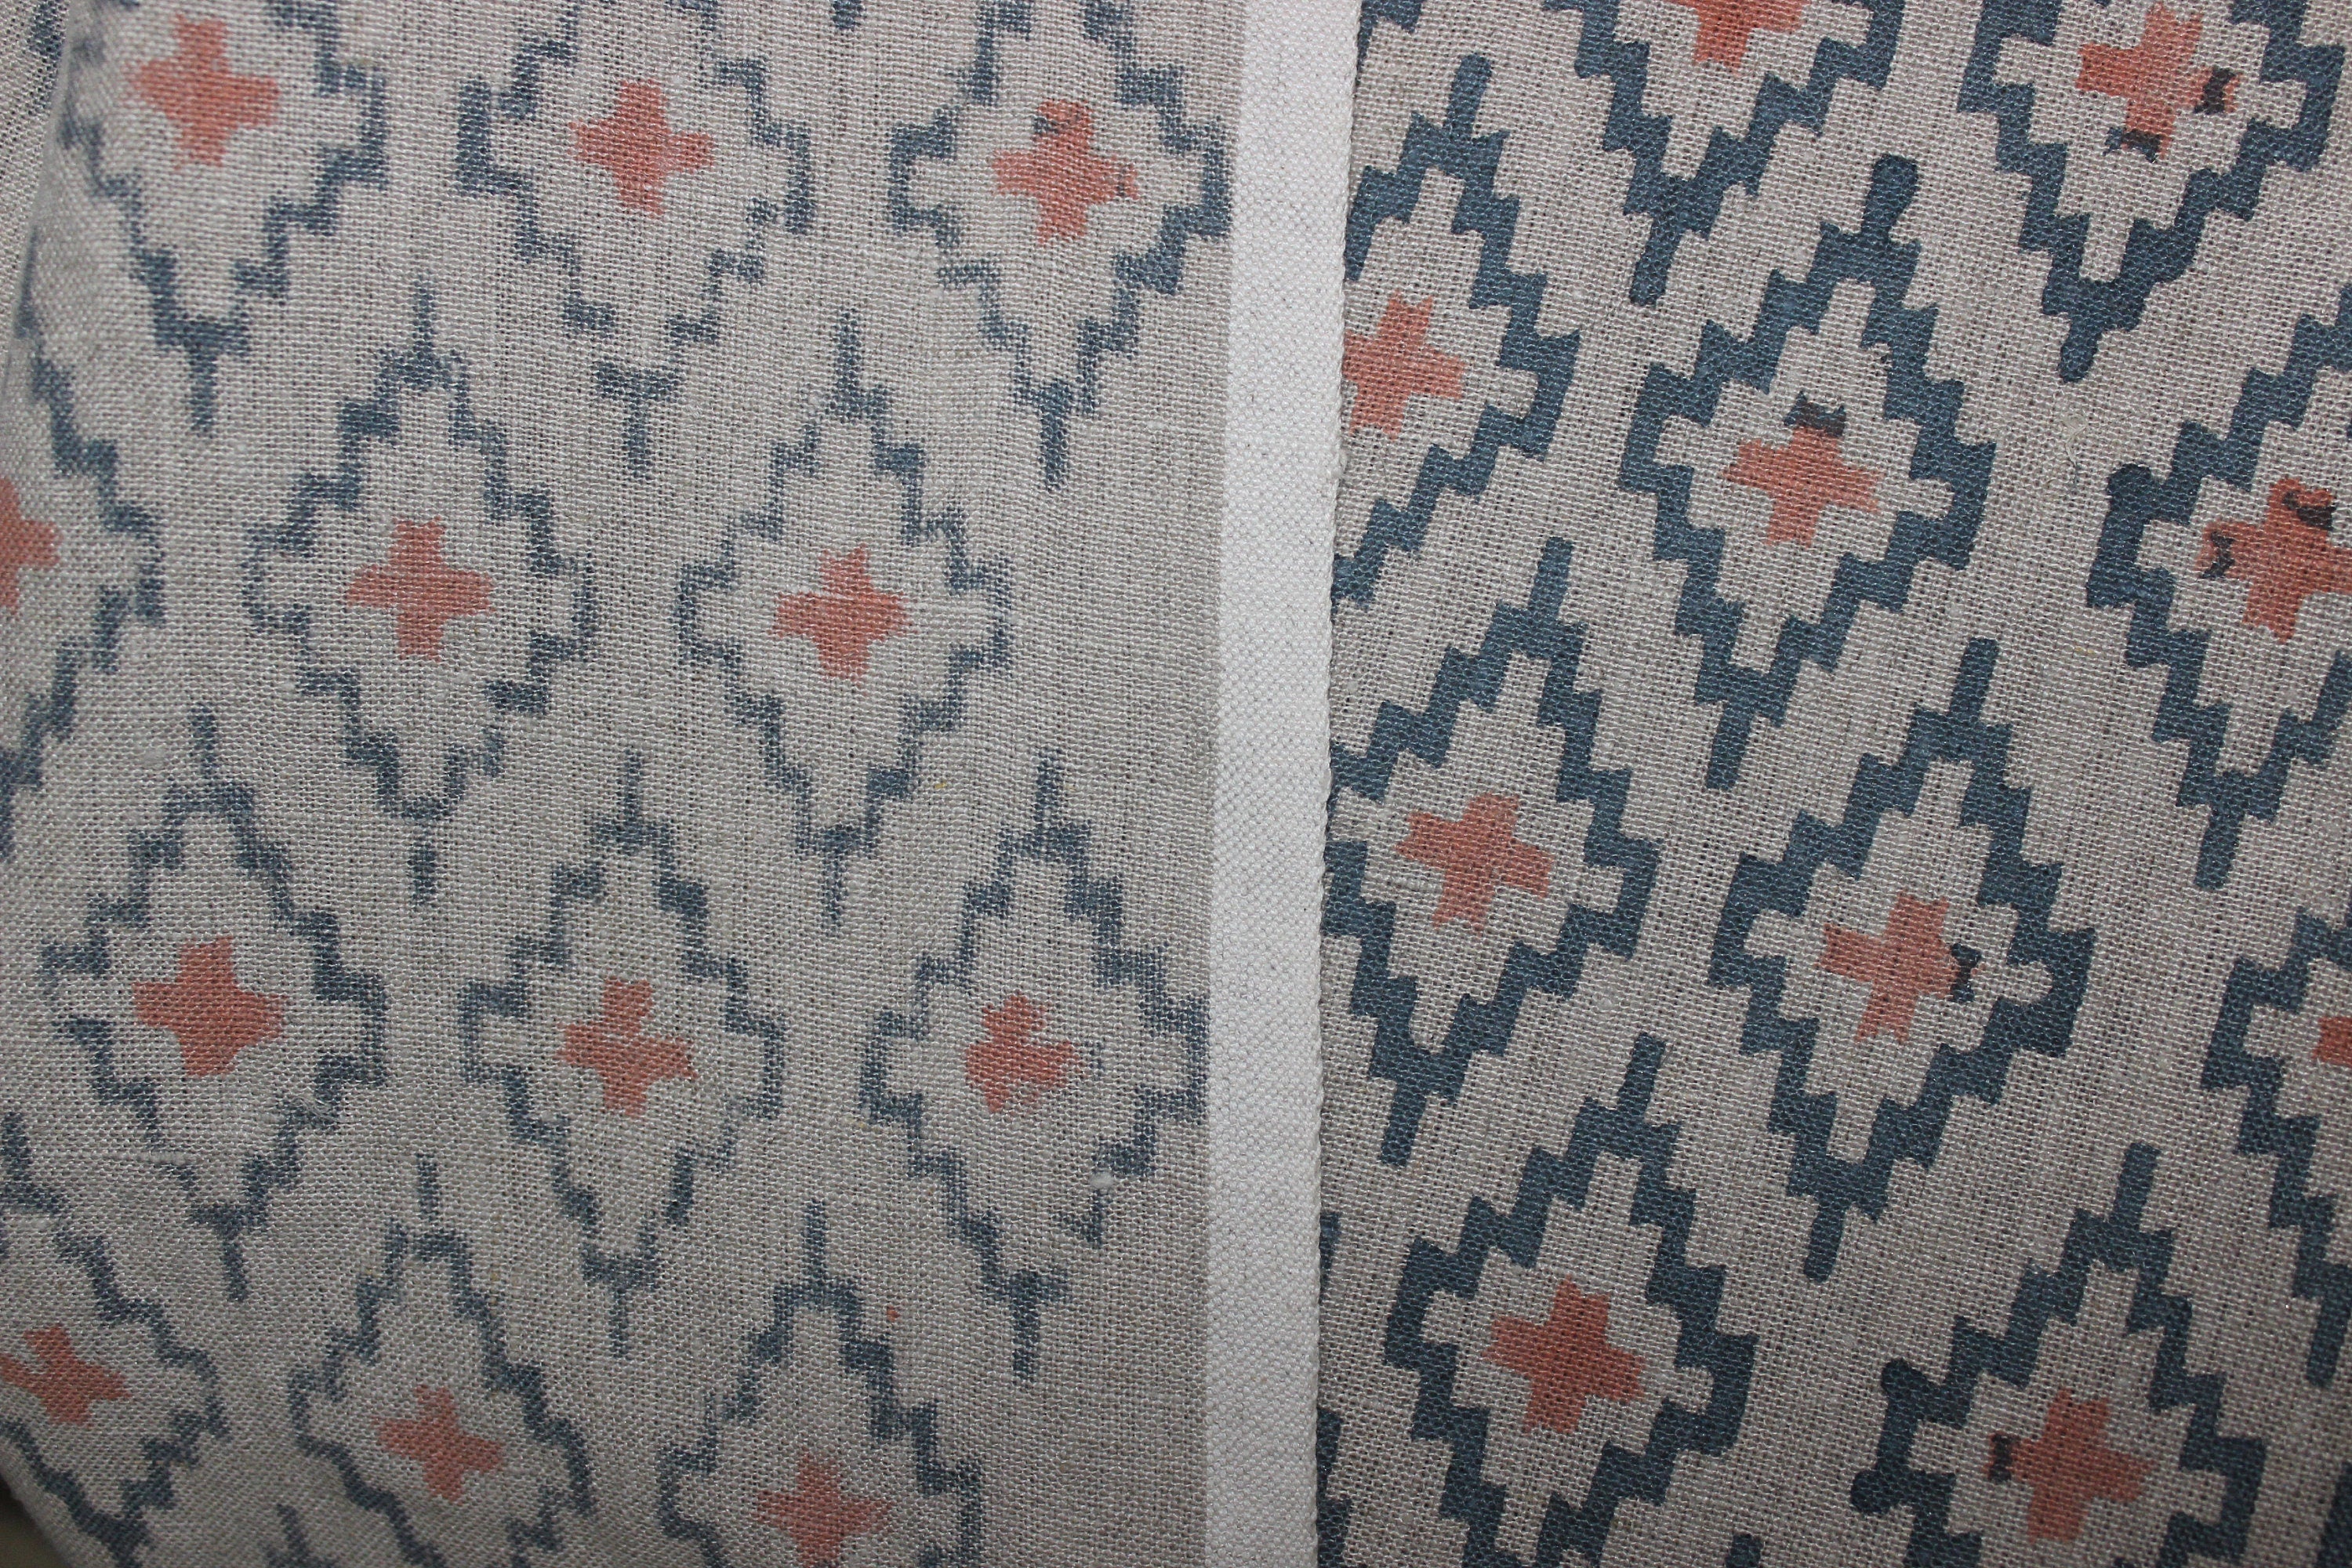 Ikat  Block Print On Linen Fabric  Hand Blocked Printed Indian Fabric By The Yard